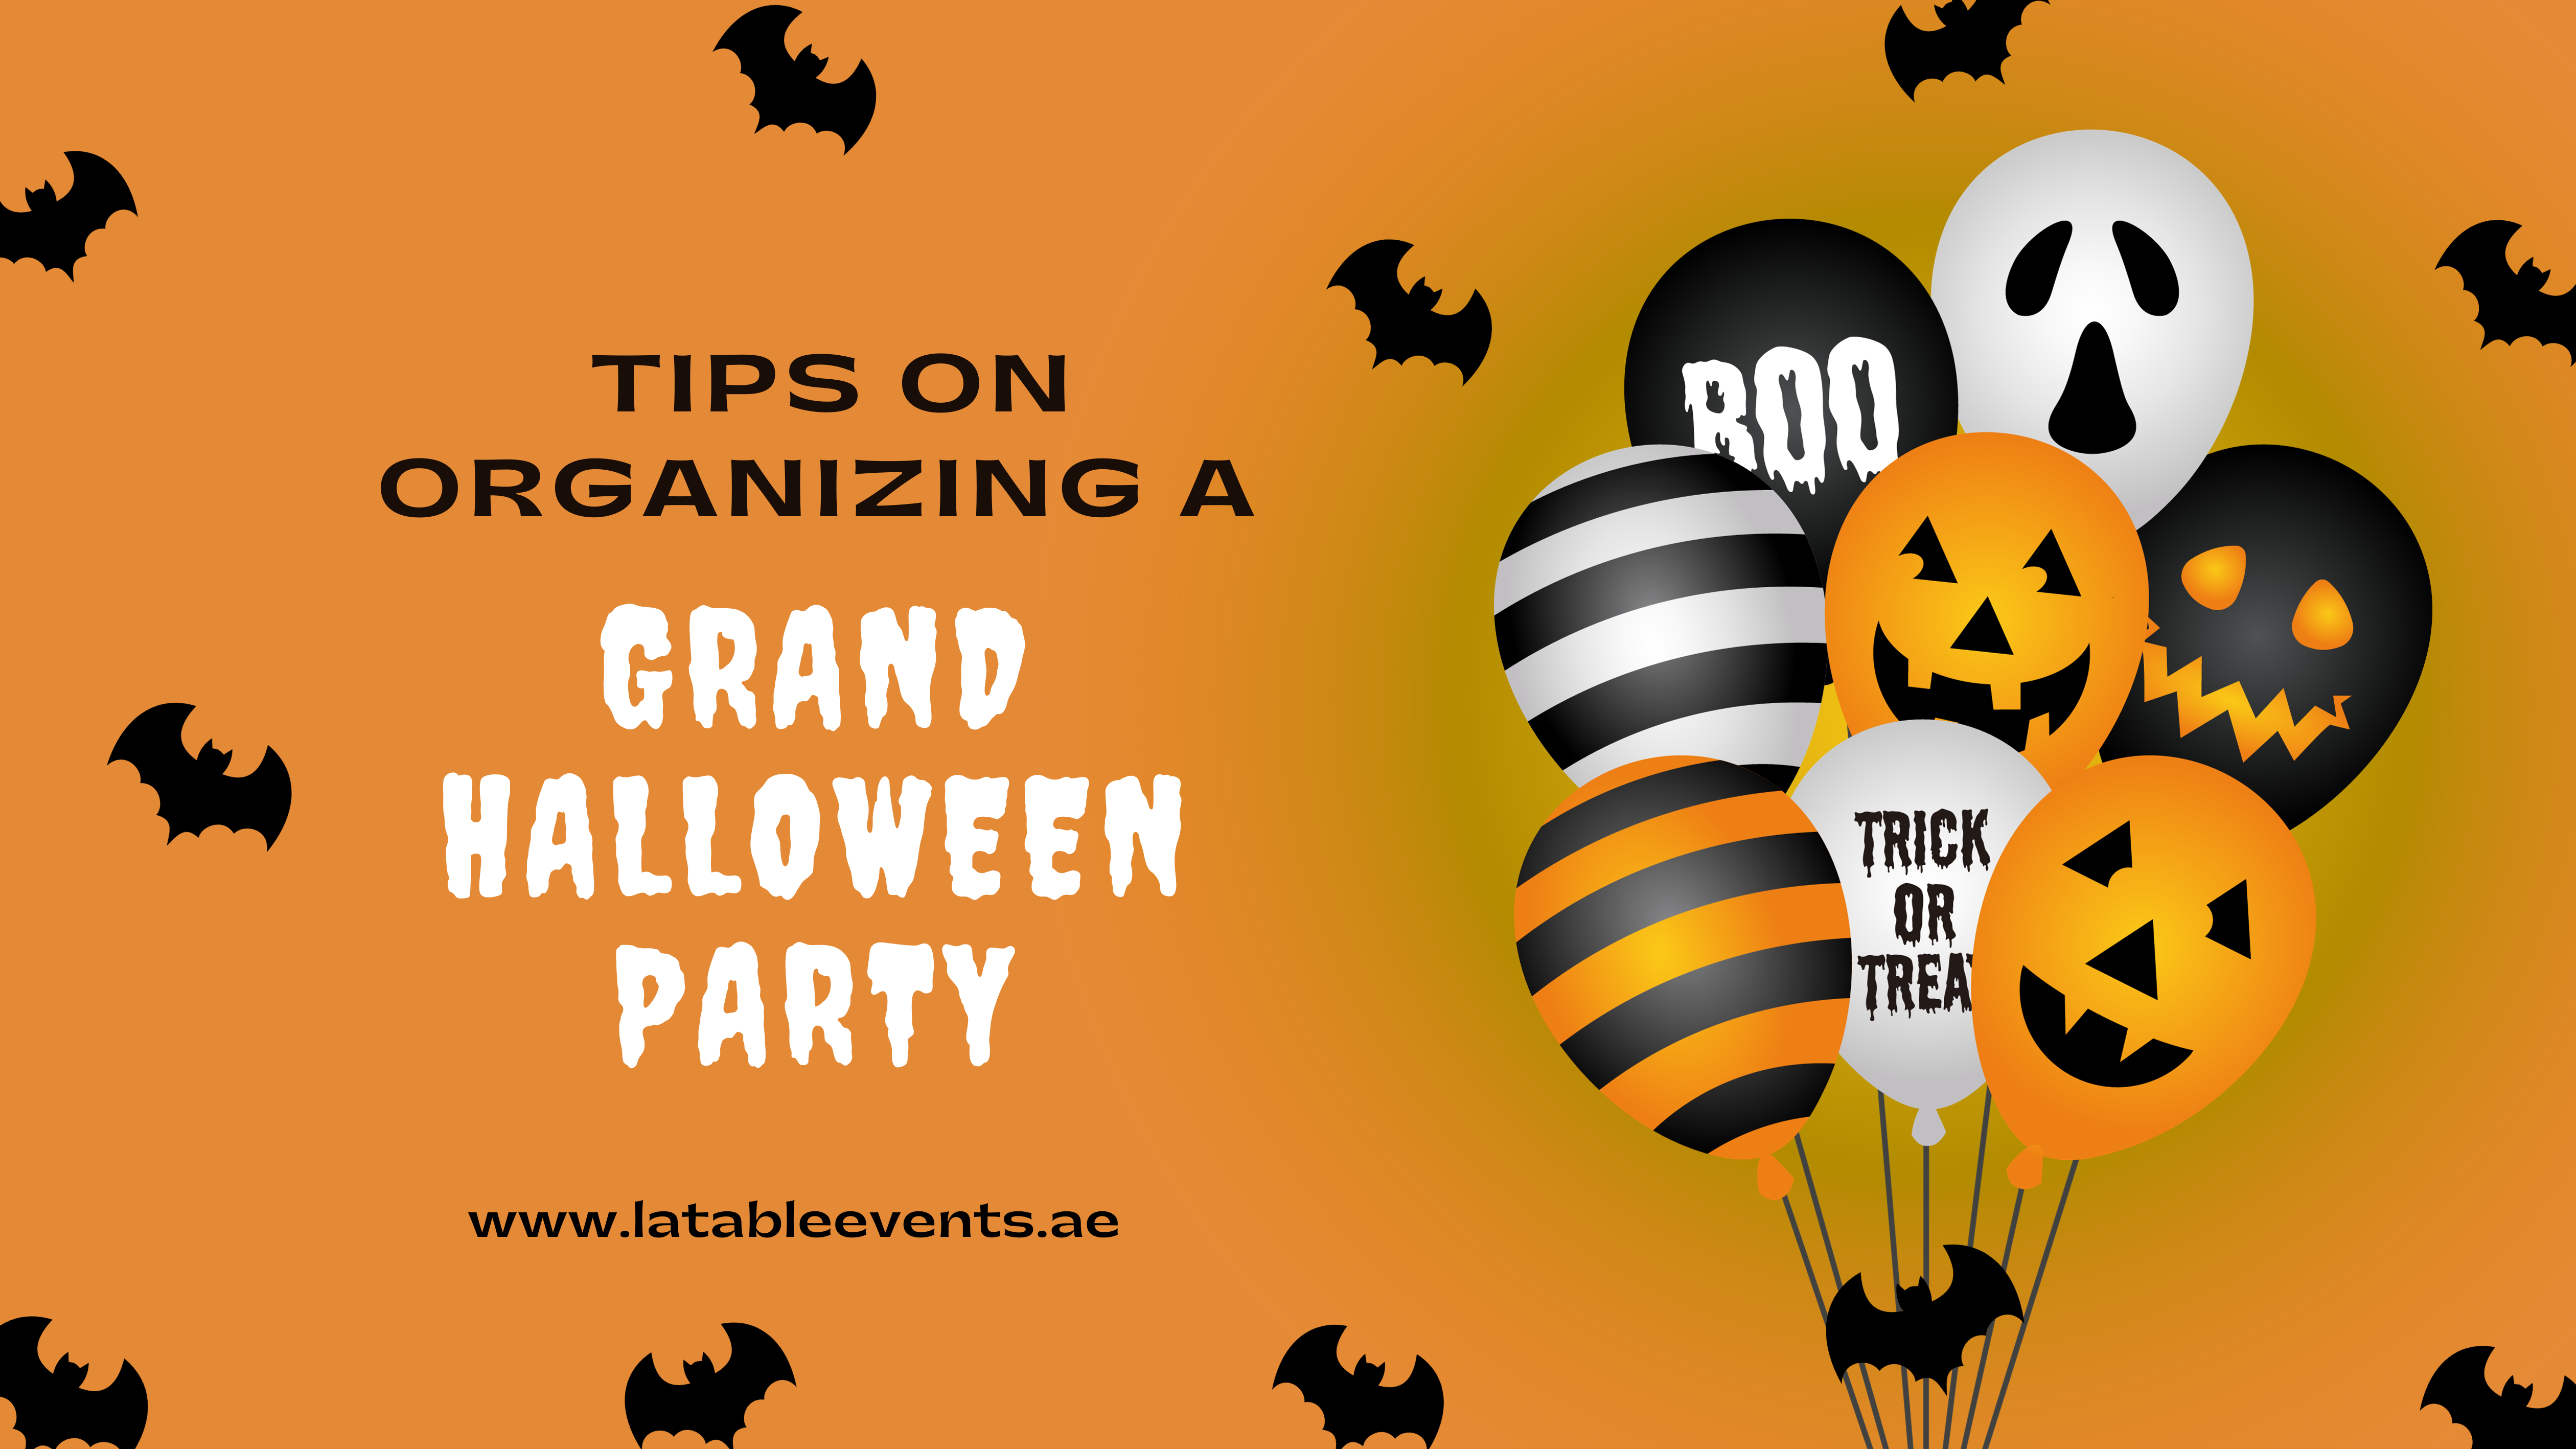 Tips on Organizing a Grand Halloween Party